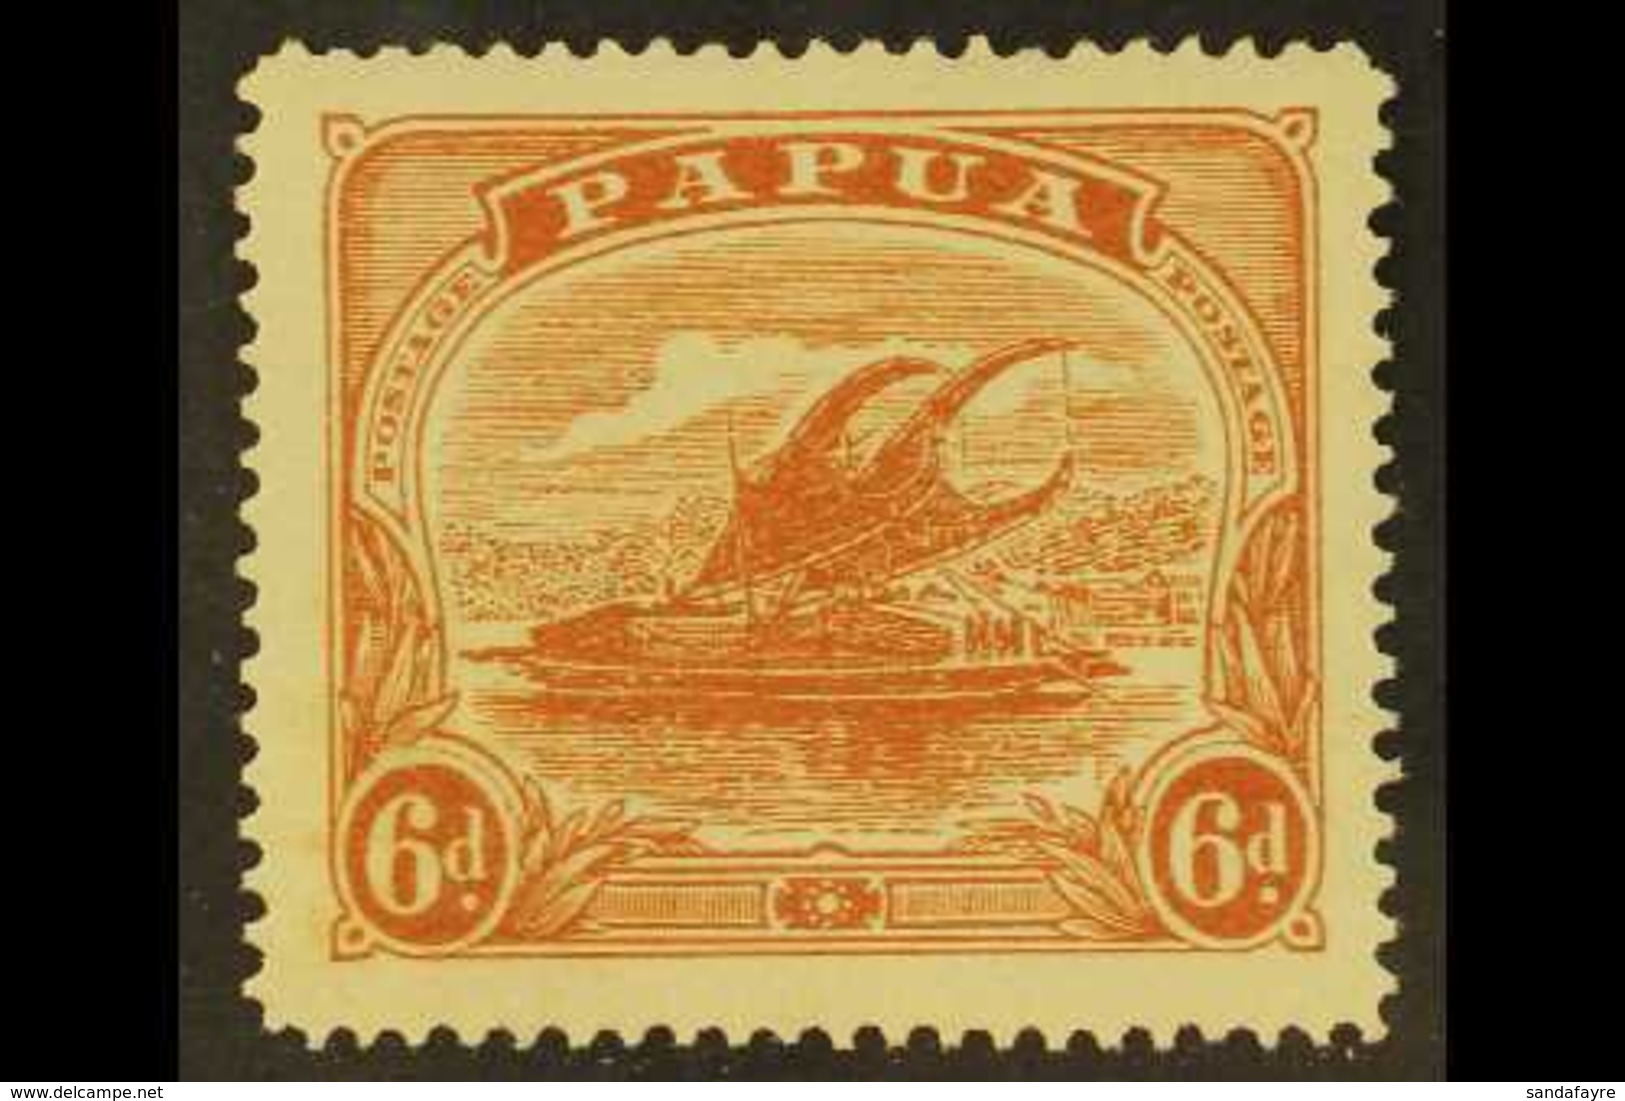 1911-15 6d Orange-brown WATERMARK CROWN TO RIGHT OF A Variety, SG 89w, Fine Mint, Scarce. For More Images, Please Visit  - Papouasie-Nouvelle-Guinée